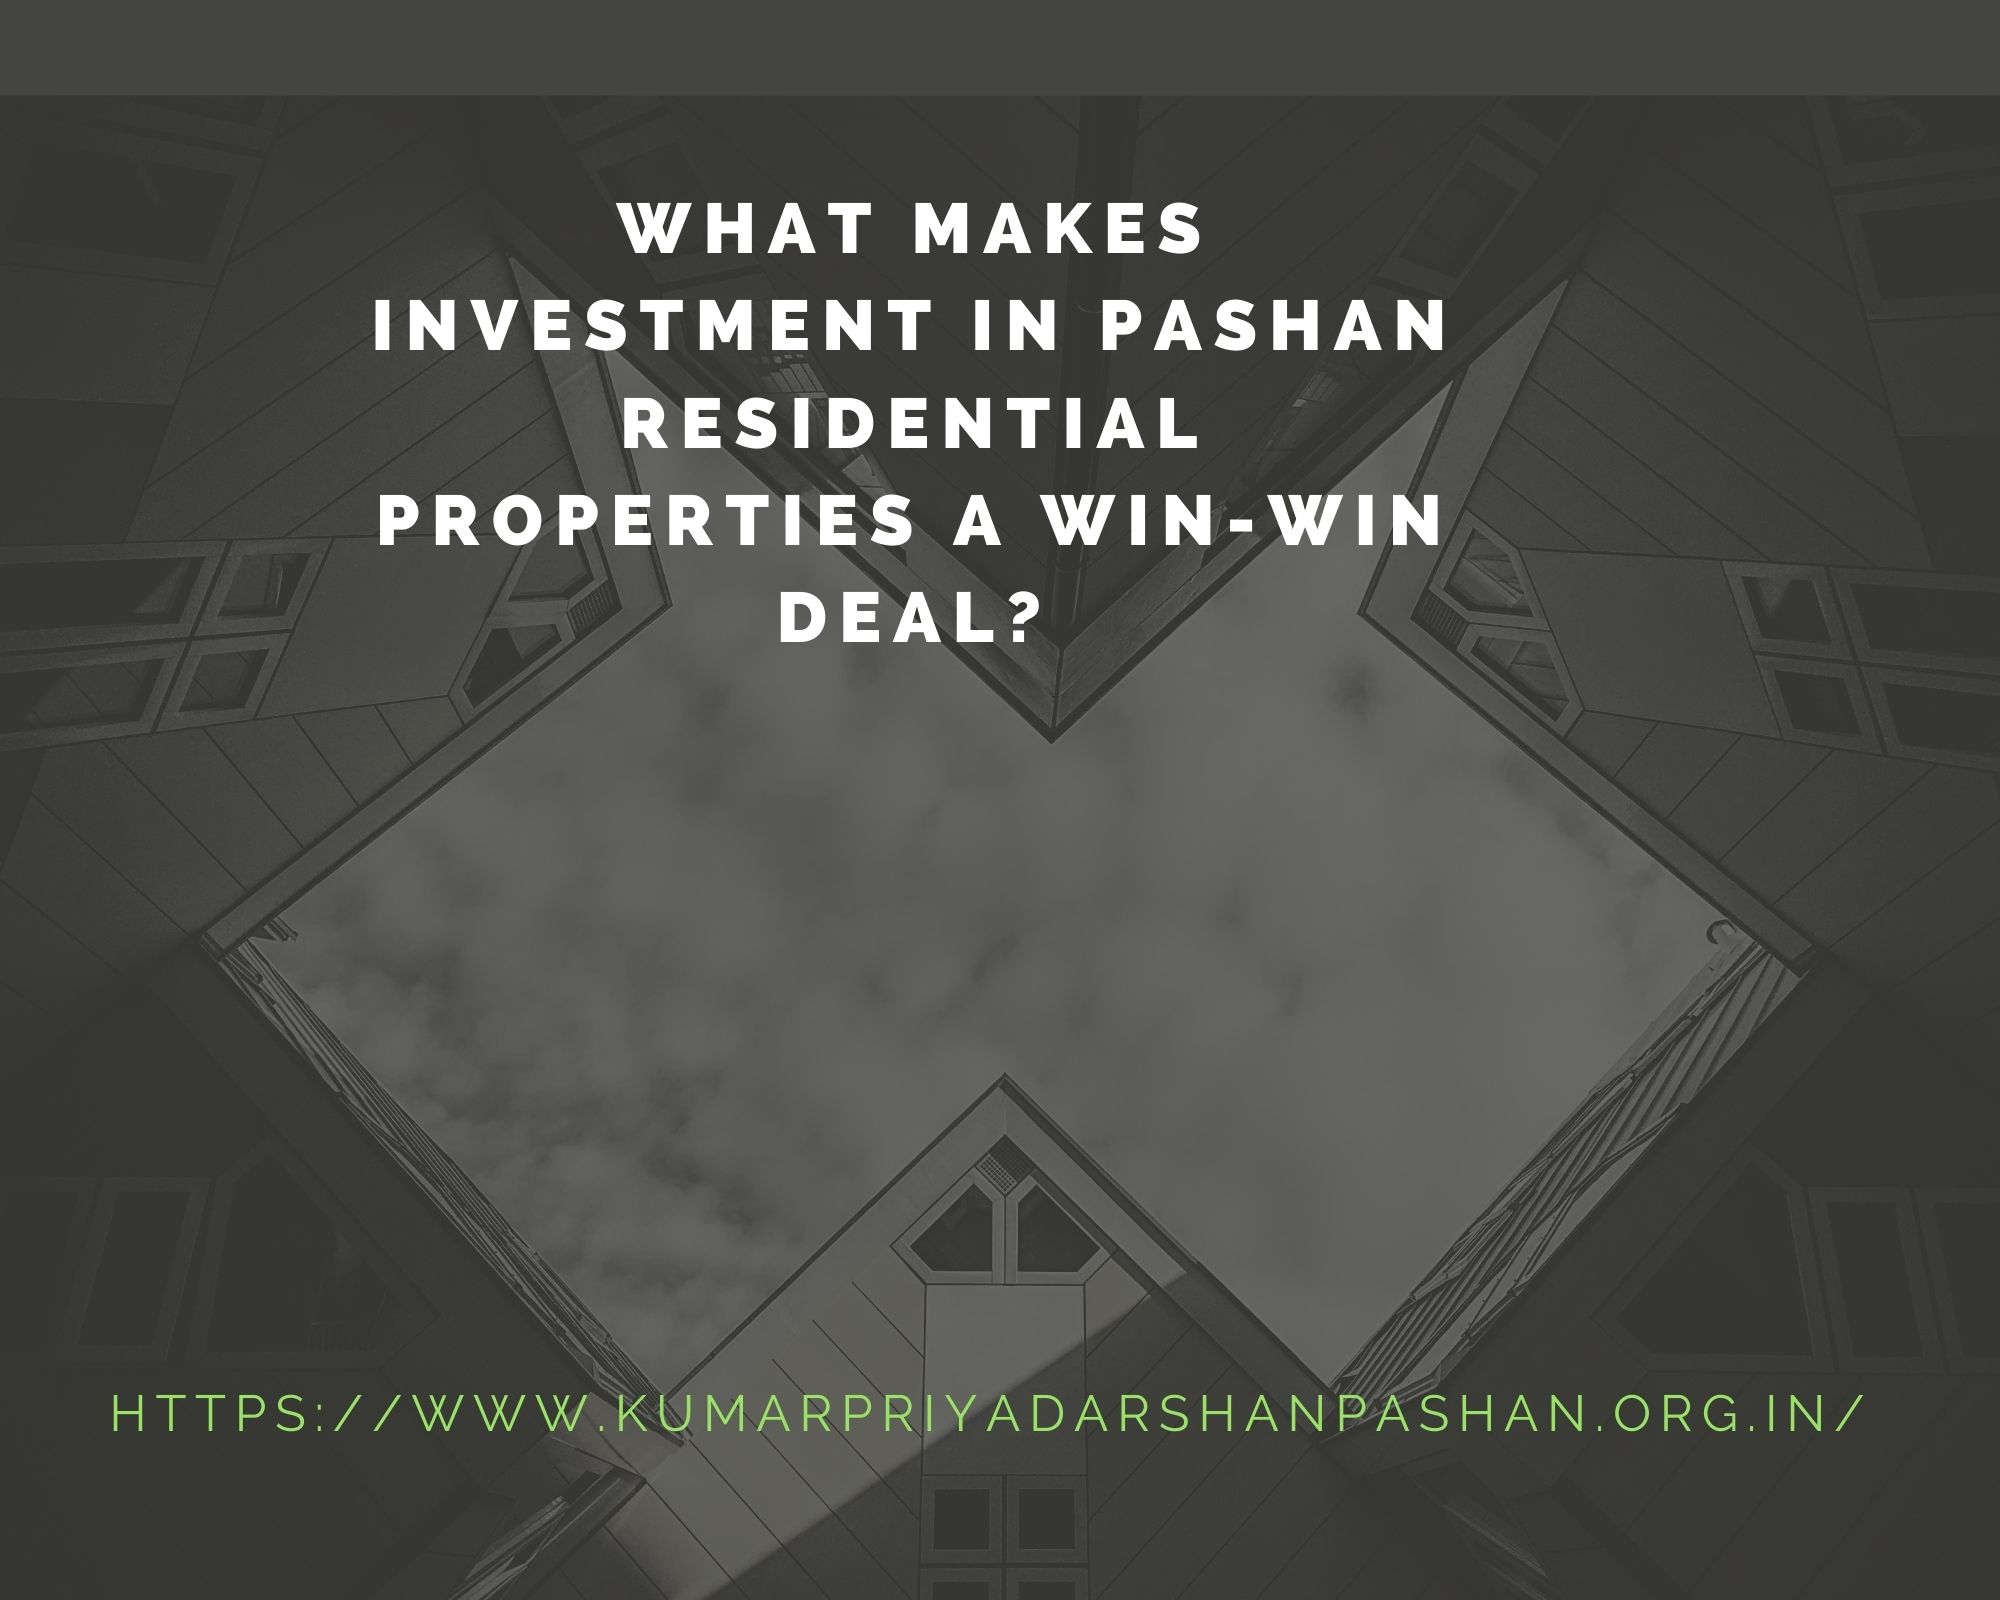 What makes investment in Pashan residential properties a win-win deal?